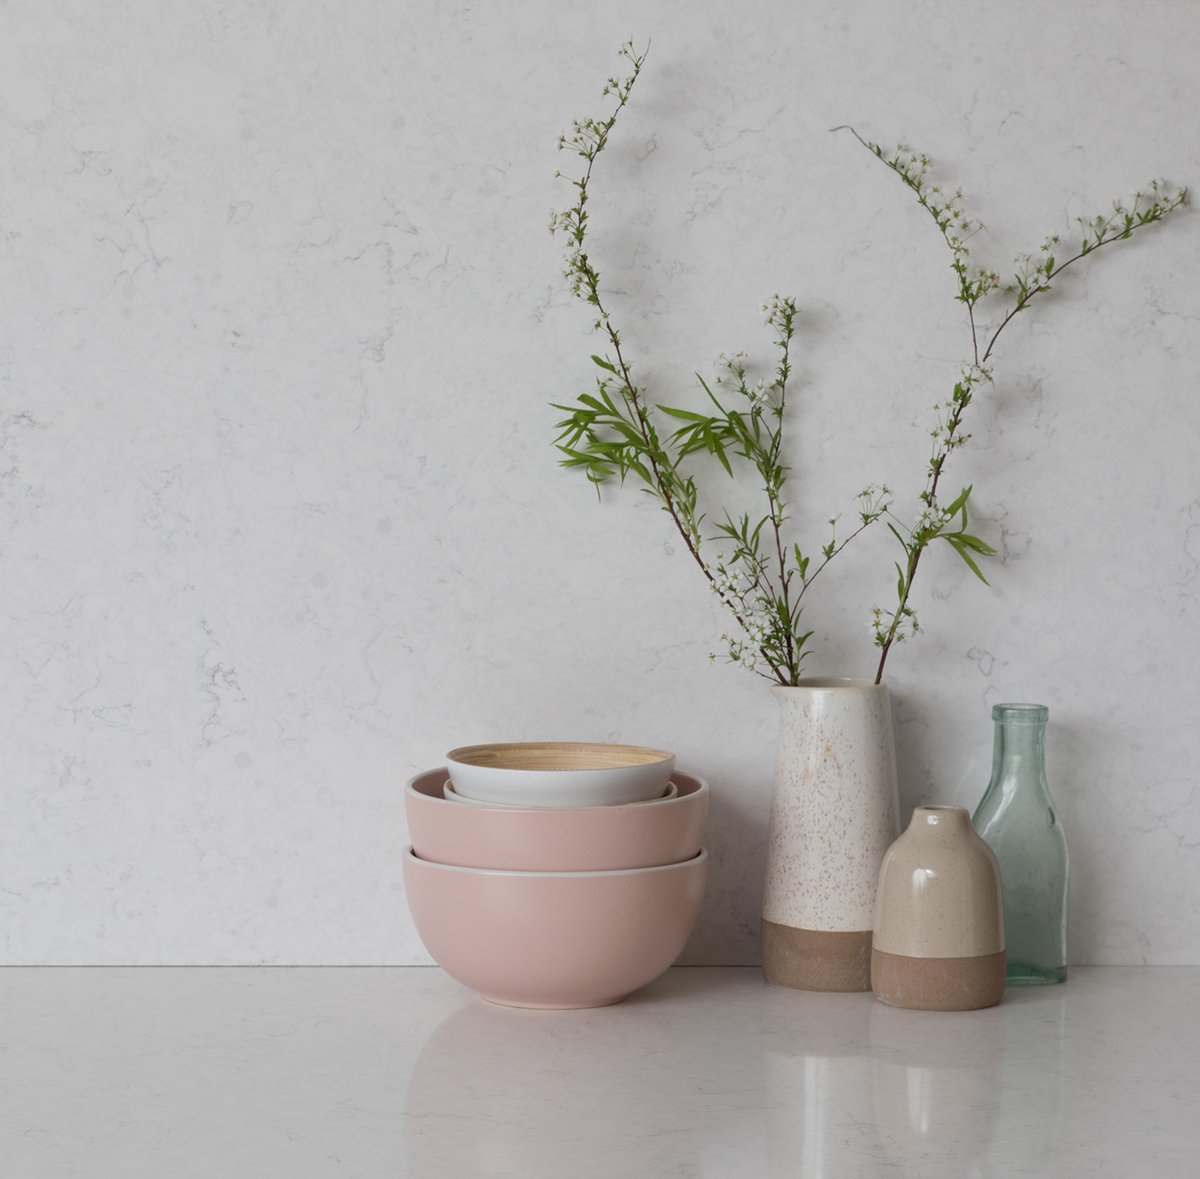 To maintain a harmonious look in your scandi kitchen, consider using the same material for your worktops and splashback. Choose a quartz worktop with patterns and colours that complement your overall kitchen theme and extend it to the splashback. Pictured: CRL Quartz White Water